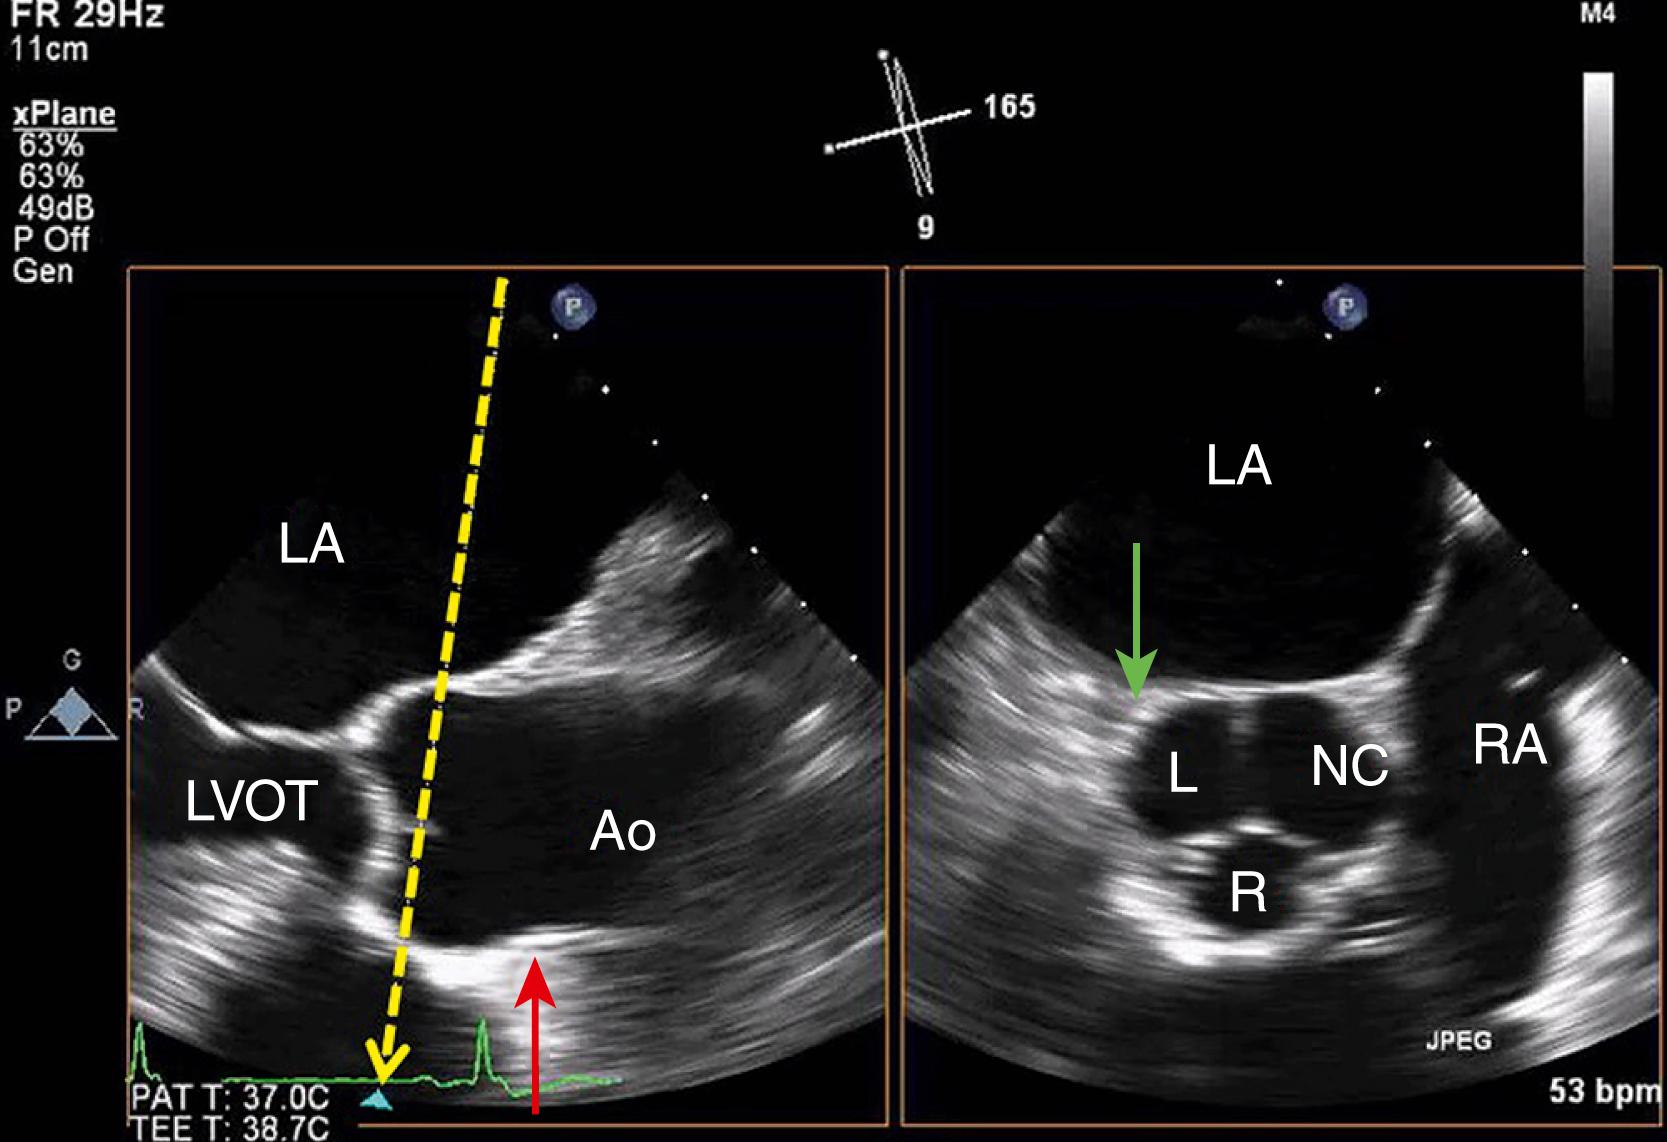 Figure 13.7, Simultaneous multiplane imaging of the aortic valve. From the midesophageal long-axis view of the aorta (view #6), the simultaneous orthogonal view is the short-axis view of the aorta. However, this view appears inverted from the single-plane midesophageal short-axis view (view #10). From these views, the right coronary artery (red arrow) and left coronary artery (green arrow) can be imaged. See text for abbreviations.